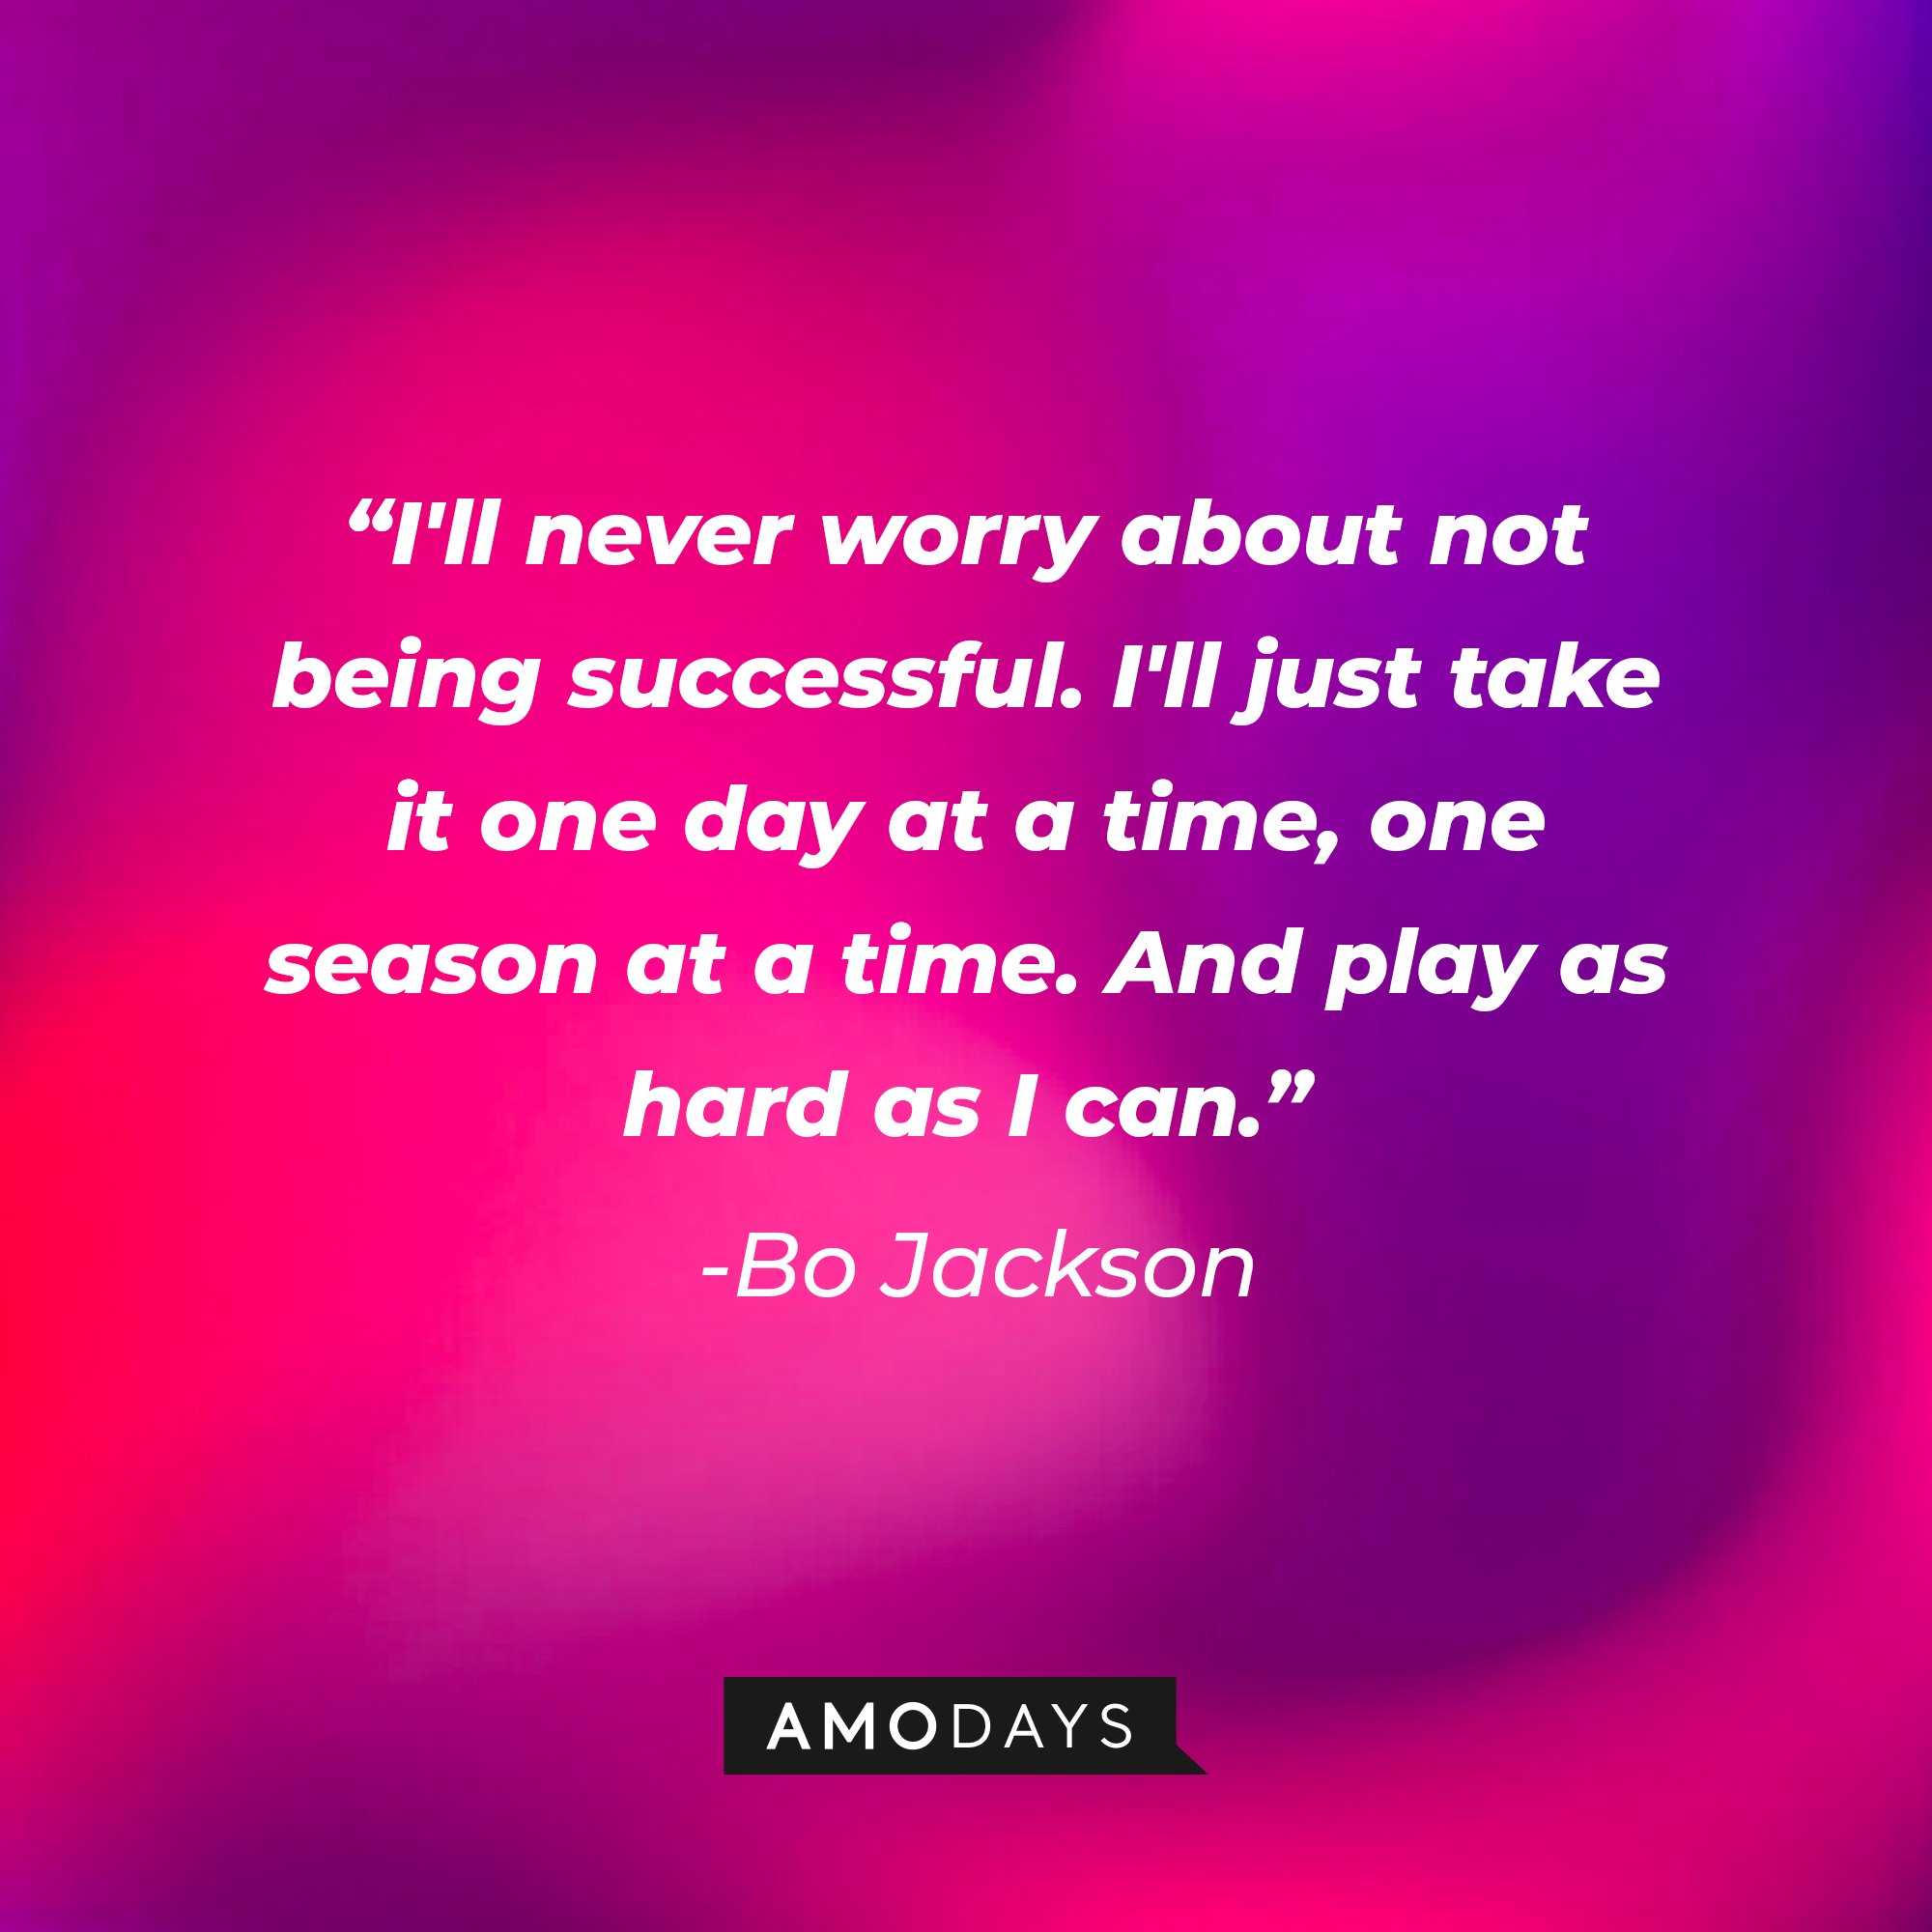 Bo Jackson's quote: "I'll never worry about not being successful. I'll just take it one day at a time, one season at a time. And play as hard as I can." | Image: AmoDays